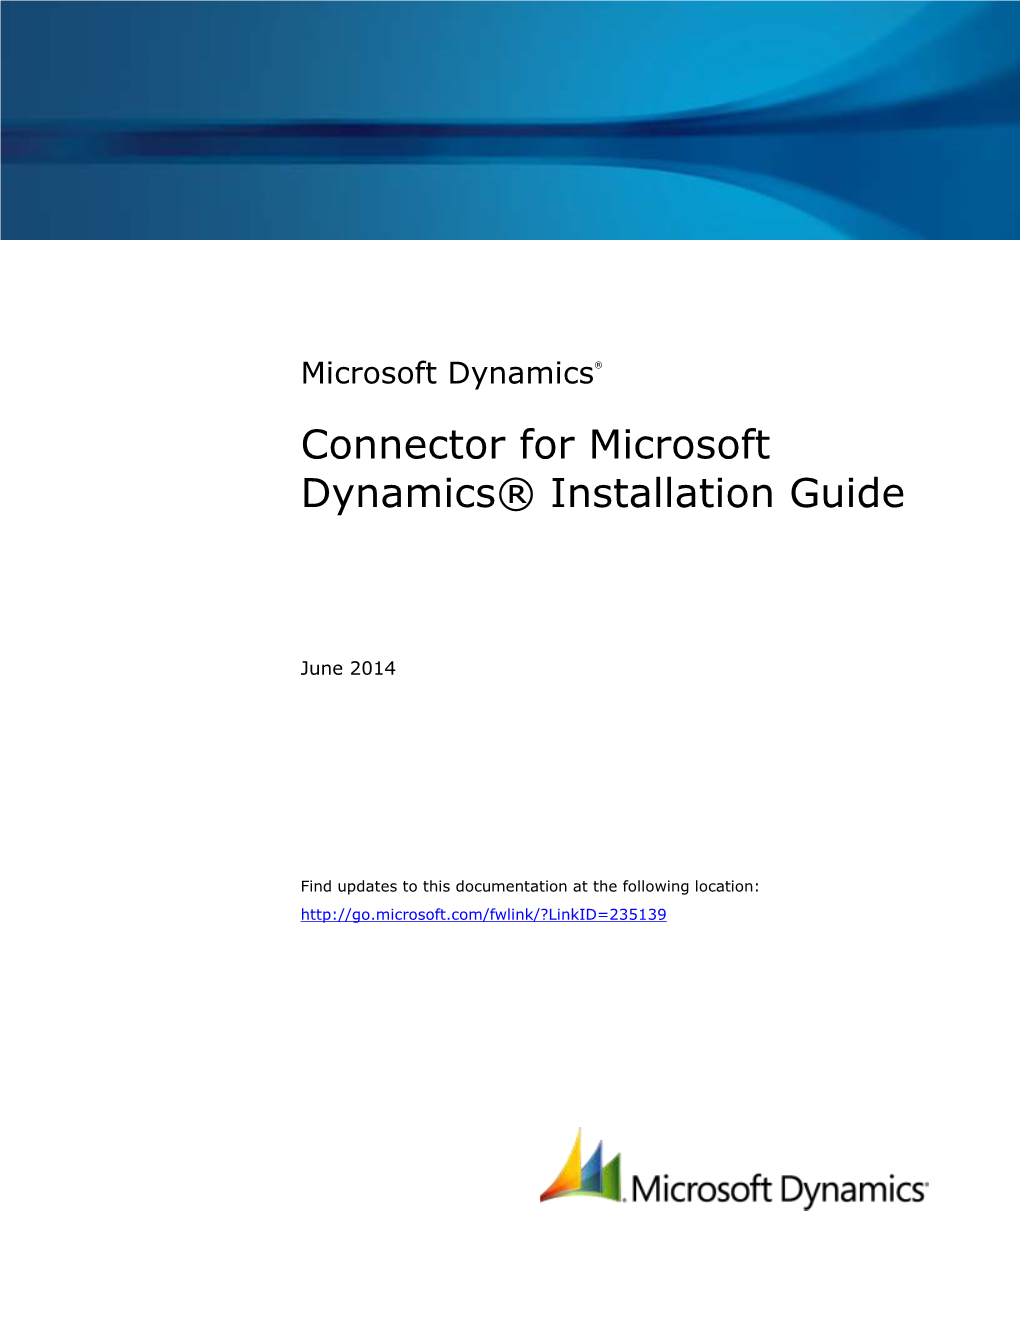 Connector for Microsoft Dynamics® Installation Guide